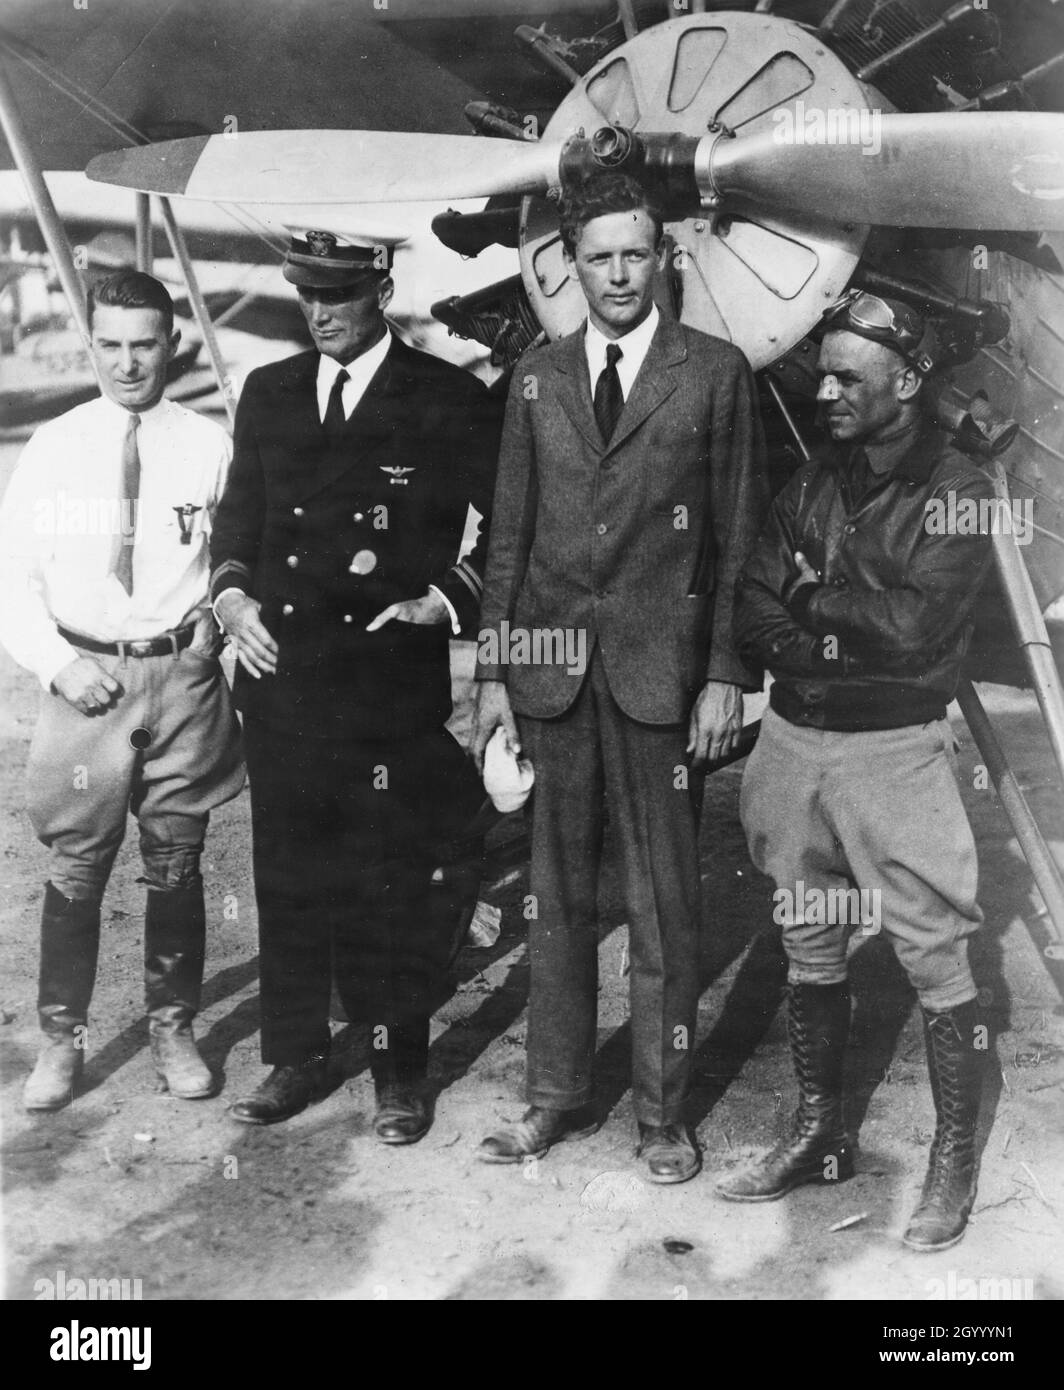 Right to left: Lt. James Doolittle, US Army Ace, Col. Charles Lindbergh, Lt. Al Williams, Navy Ace, and Clif Henderson, Director of the 1929 National Air Races. Sept 2, 1929. Stock Photo